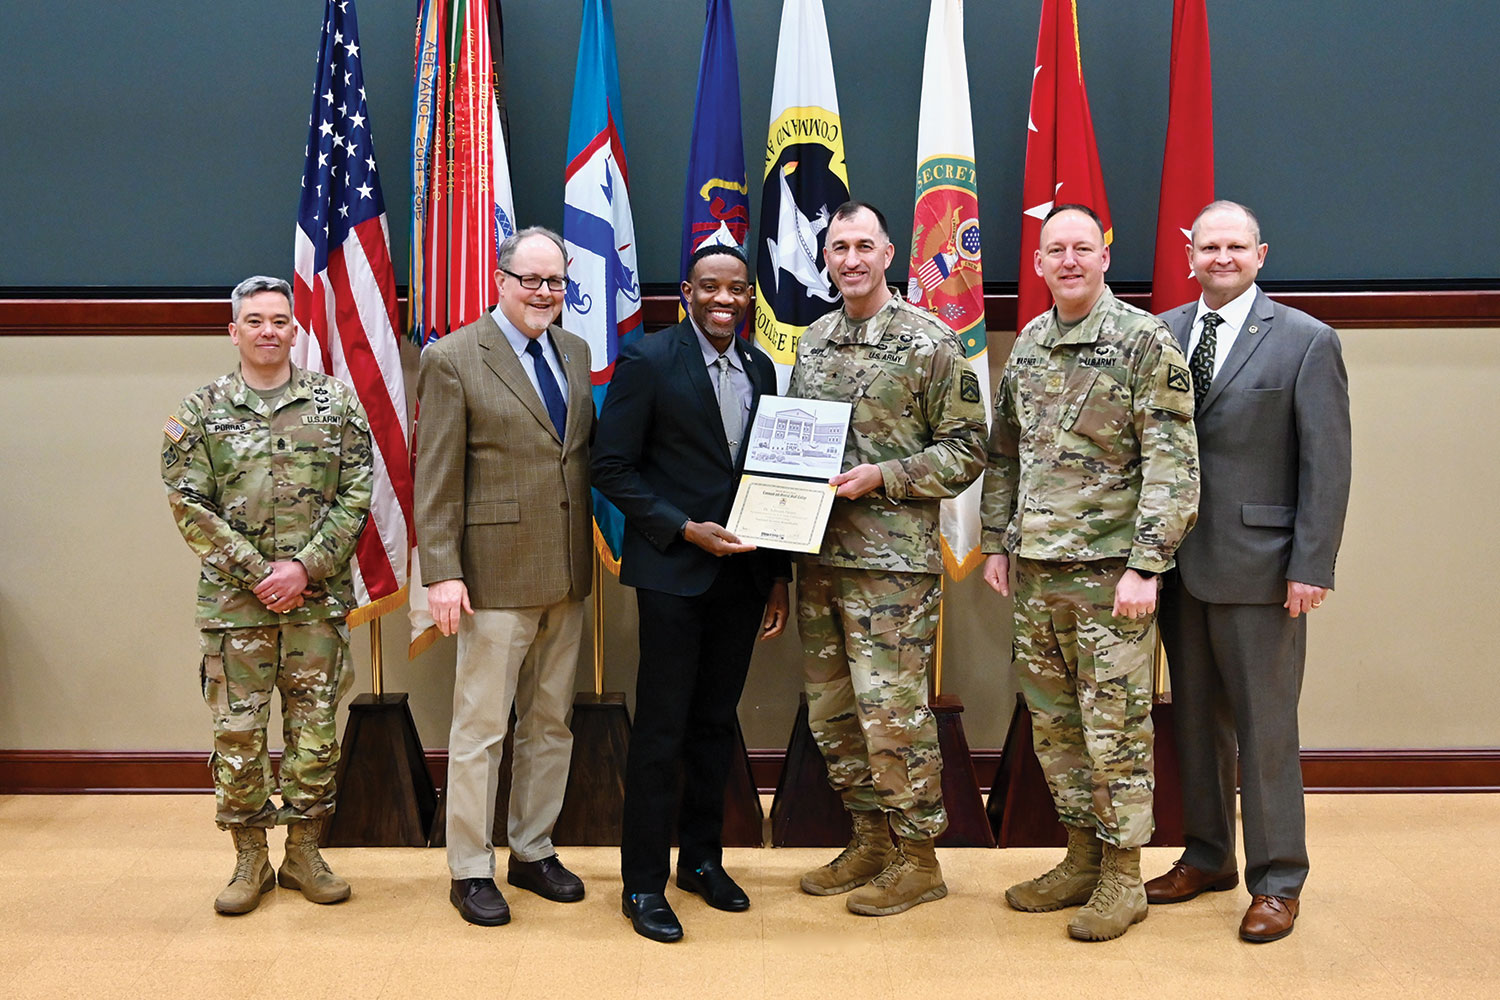 Dr. Adreian Henry, president of Mercy College of Health Sciences (third from left), receives his NSRT certificate of completion from CGSC Deputy Commandant Brig. Gen. David C. Foley. All NSRT guests receive a certificate, along with a group photo and individual photo upon completion of the program. They also receive information about how to stay involved with the Foundation and the College as NSRT alumni. From left: Army University Command Sgt. Maj. Jason C. Porras, CGSC Dean of Academics Dr. Jack D. Kem, Henry, Foley, CGSC student escort Maj. Warner, and CGSC Foundation Chairman Brig. Gen. (Ret.) Bryan Wampler.